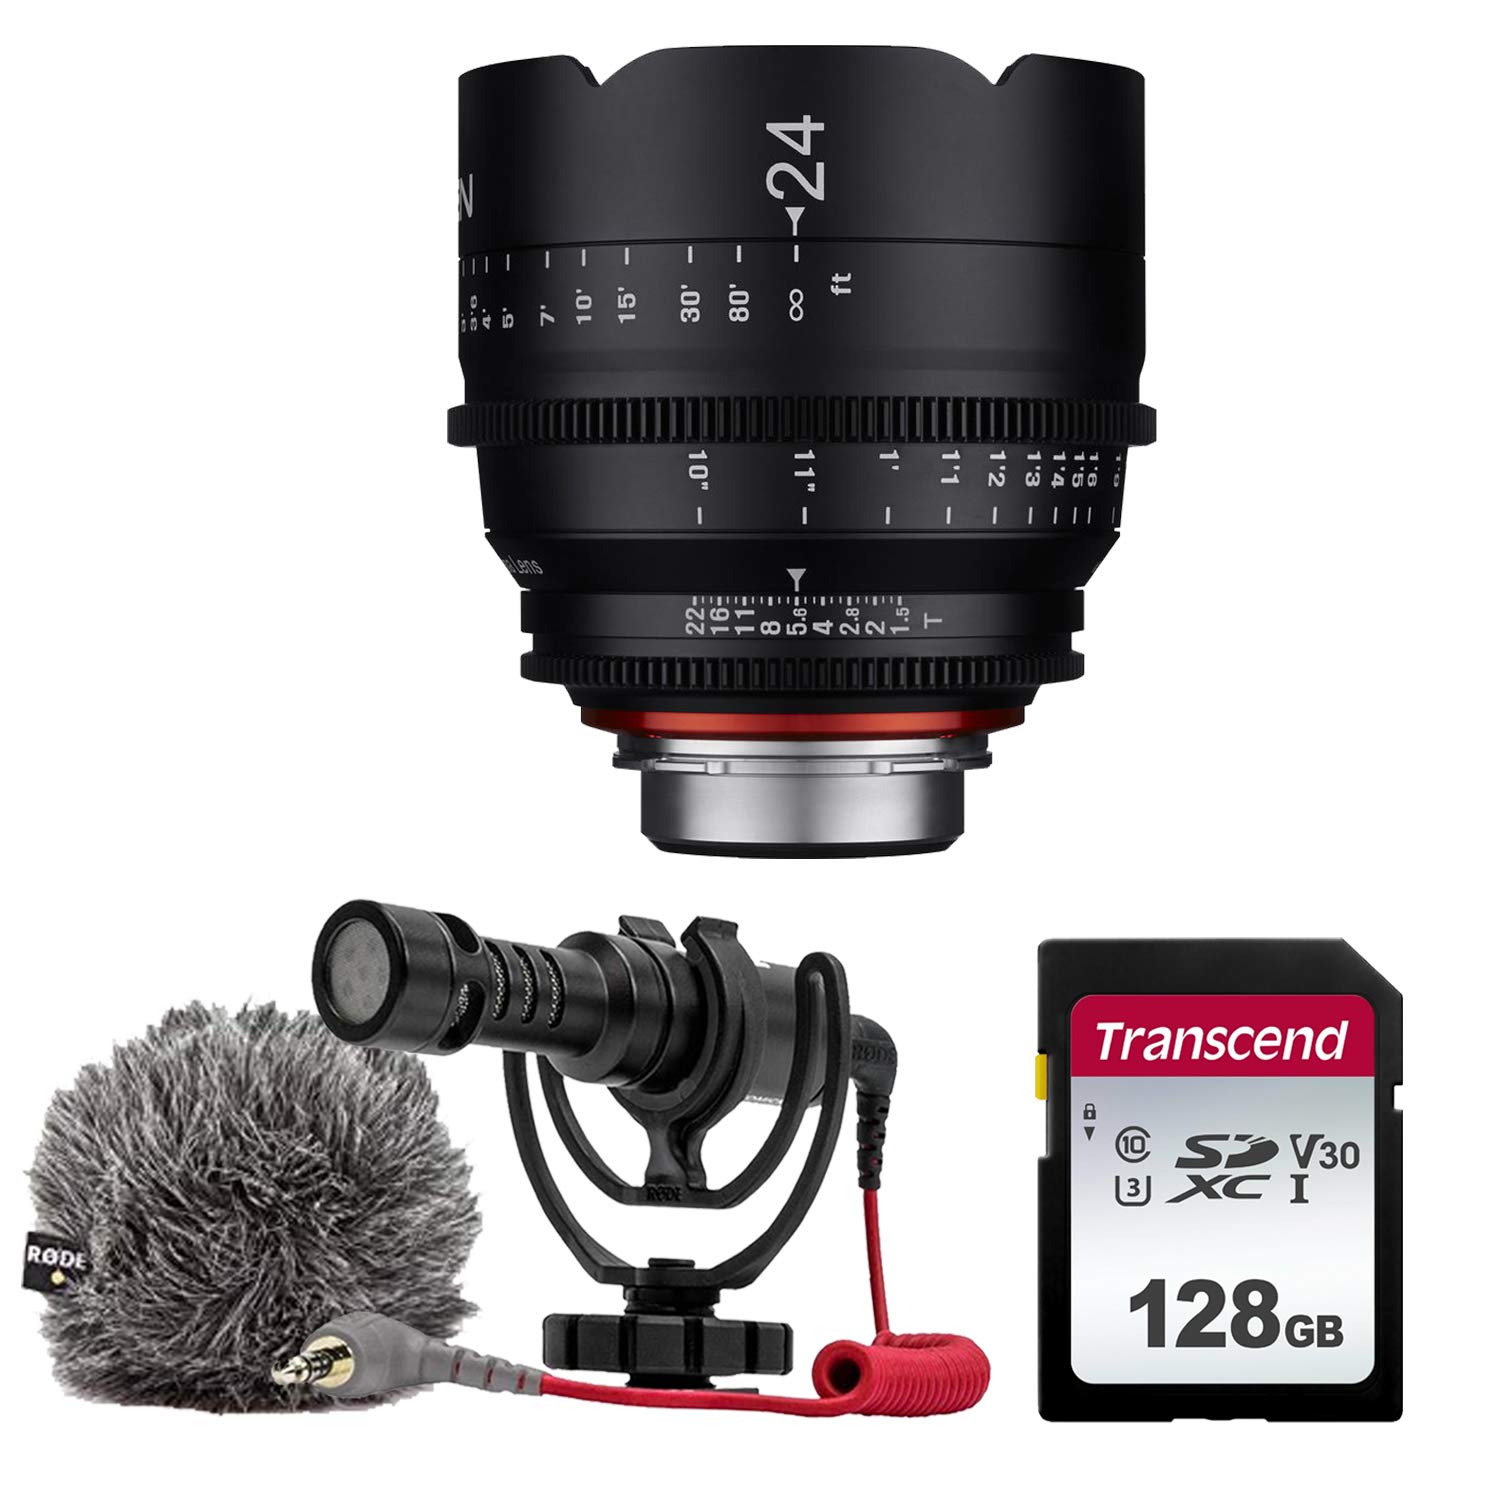 XEEN by ROKINON 24mm T1.5 Professional Cine Lens for PL Mount Rode VideoMicro Compact On-Camera Microphone with Shock Mount